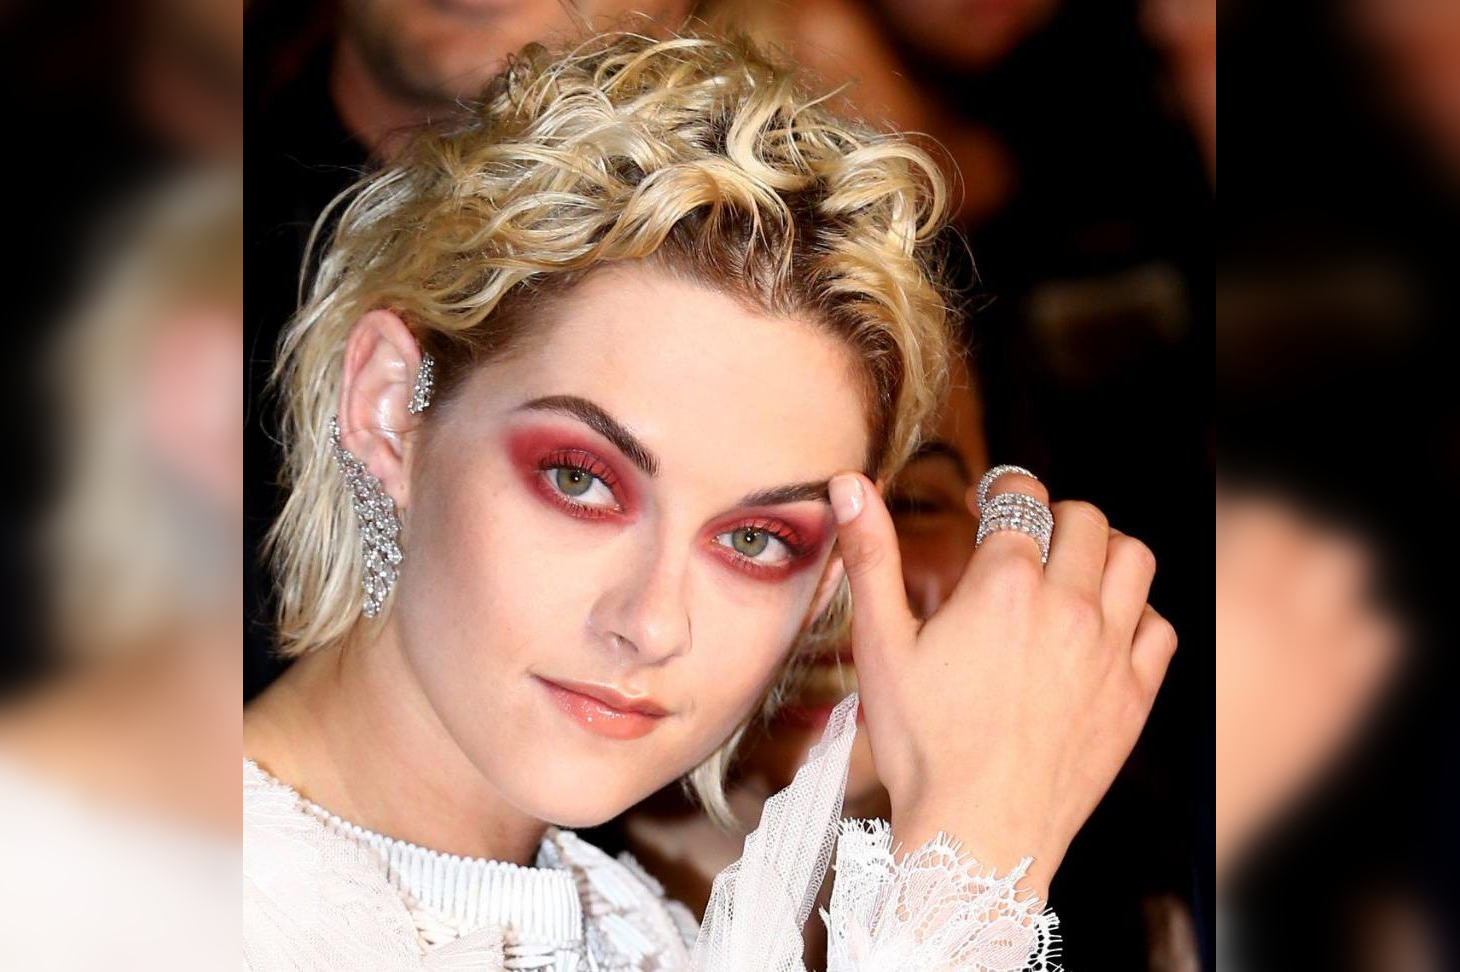 Beauty Blunders: Cringe-Worthy Makeup Fails of the Stars